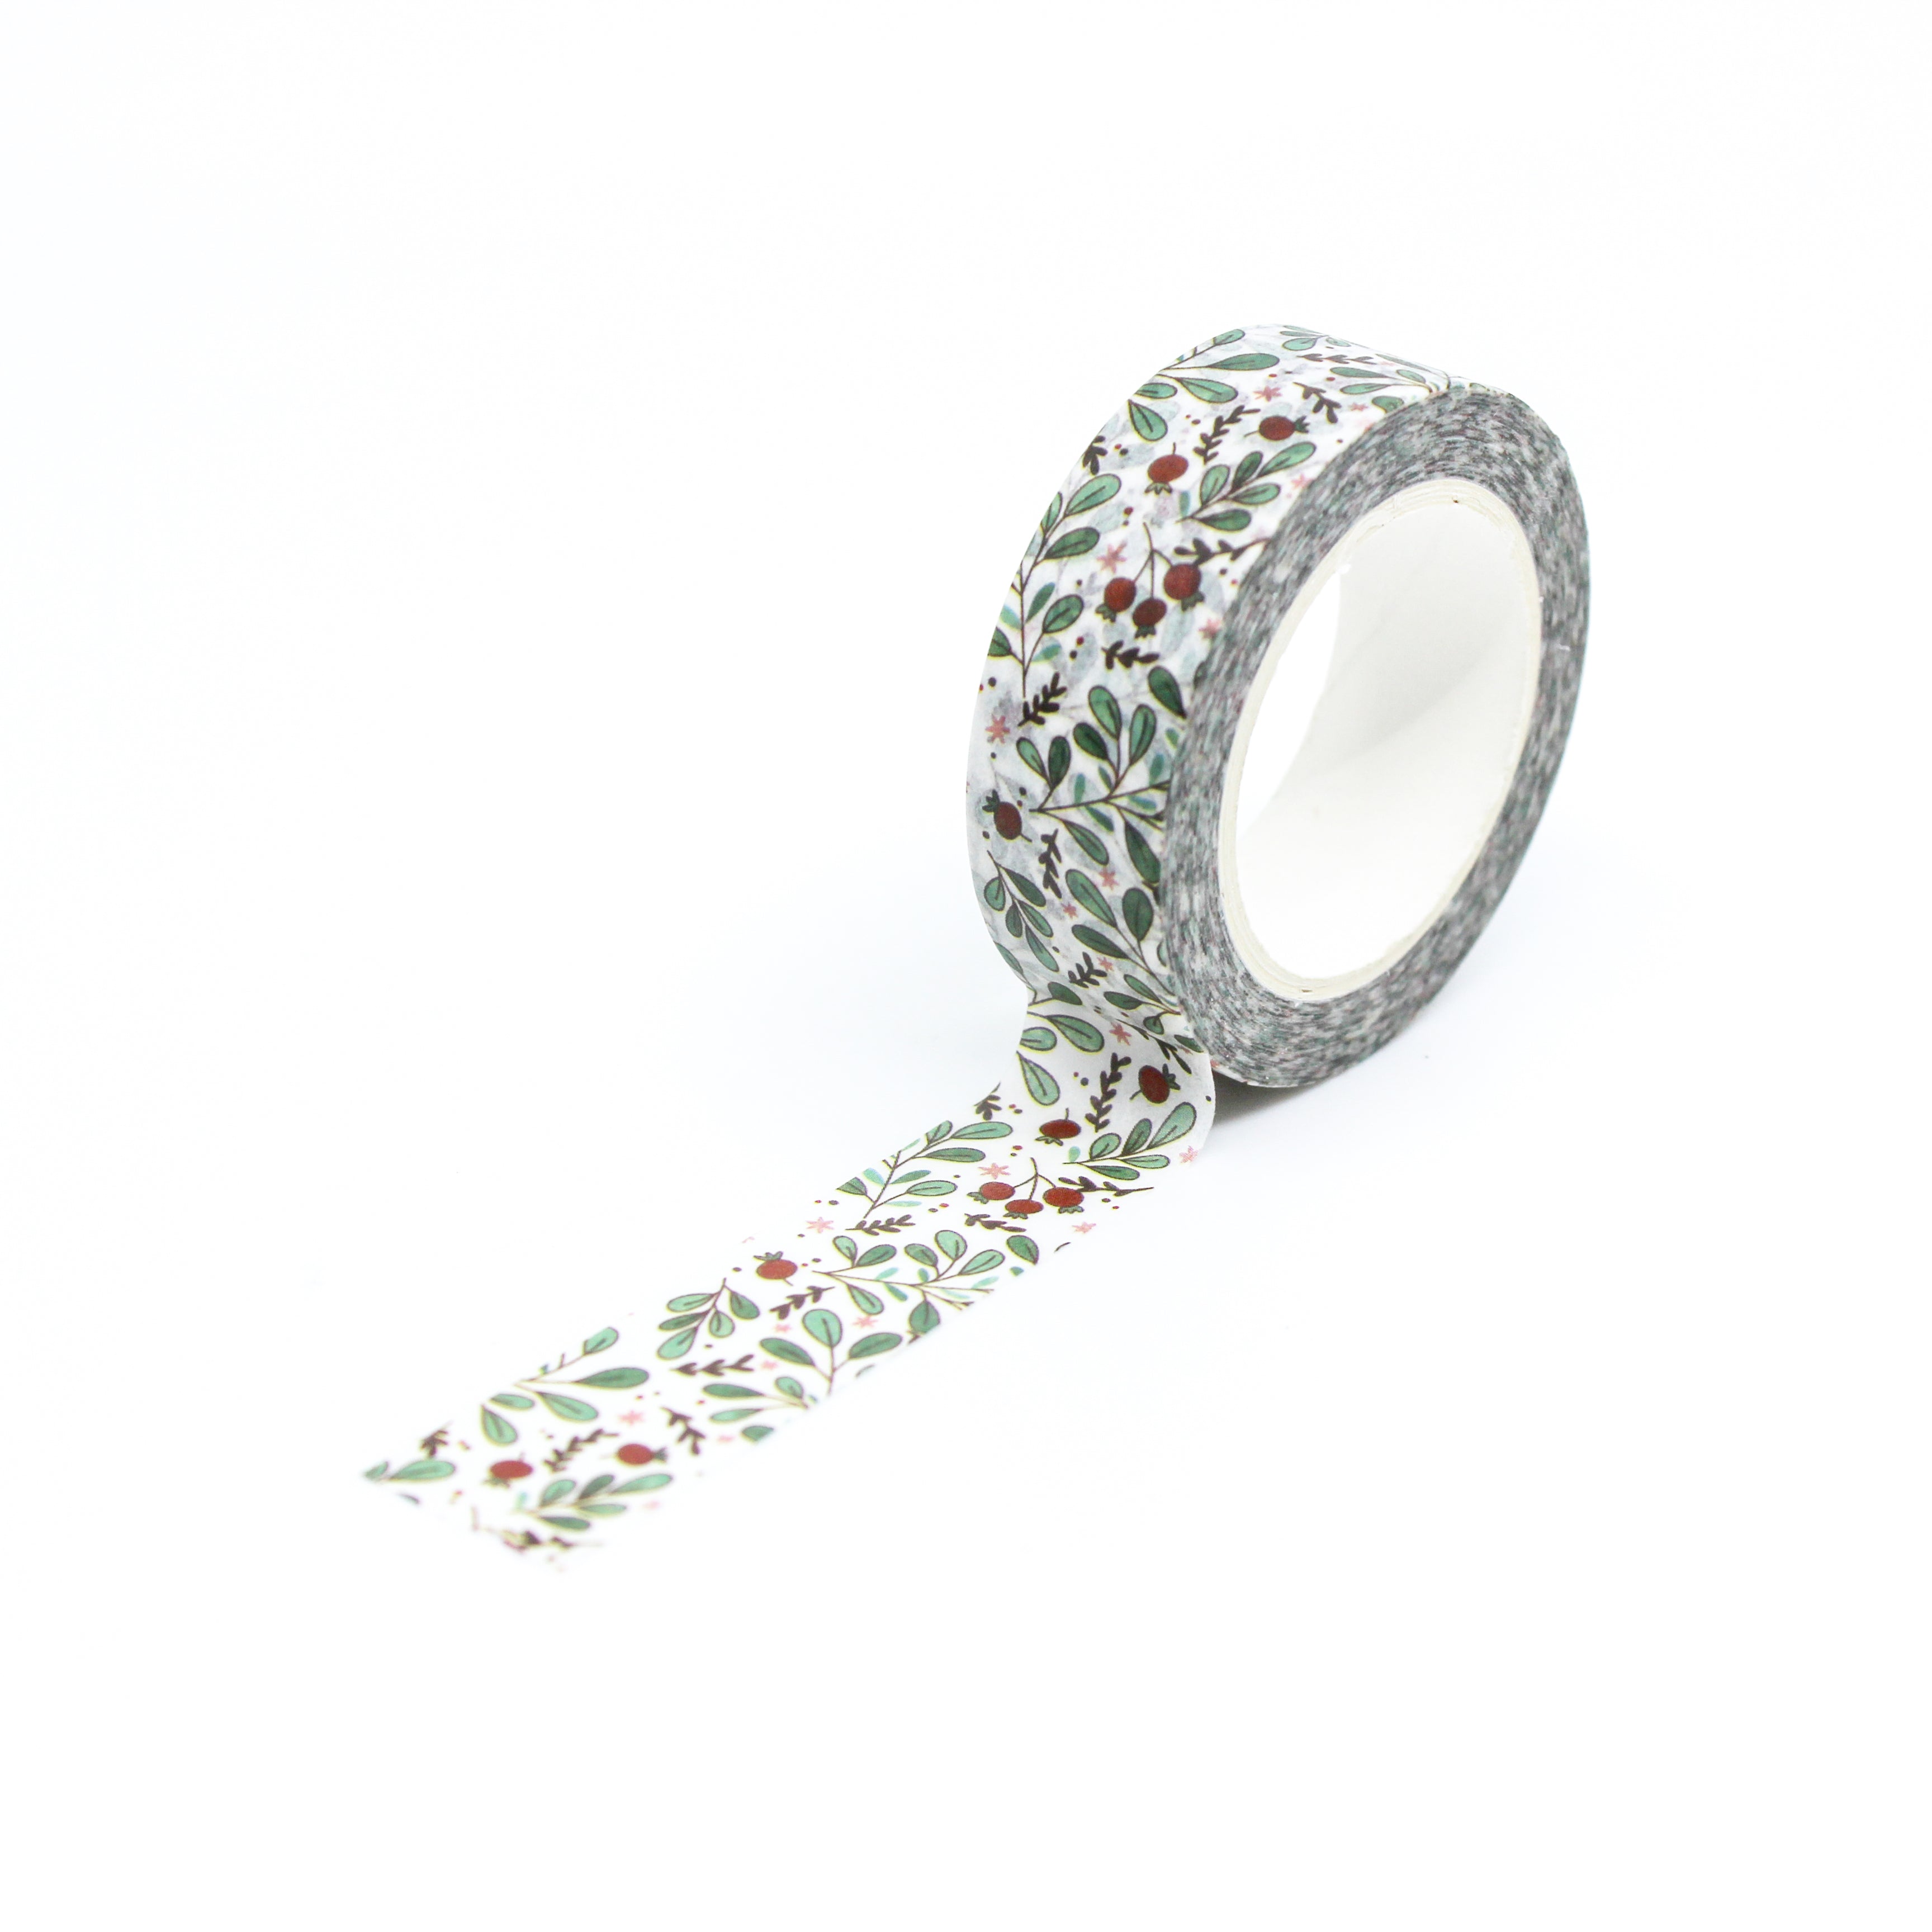 This is a full pattern repeat view of holly branch washi tape BBB Supplies Craft Shop